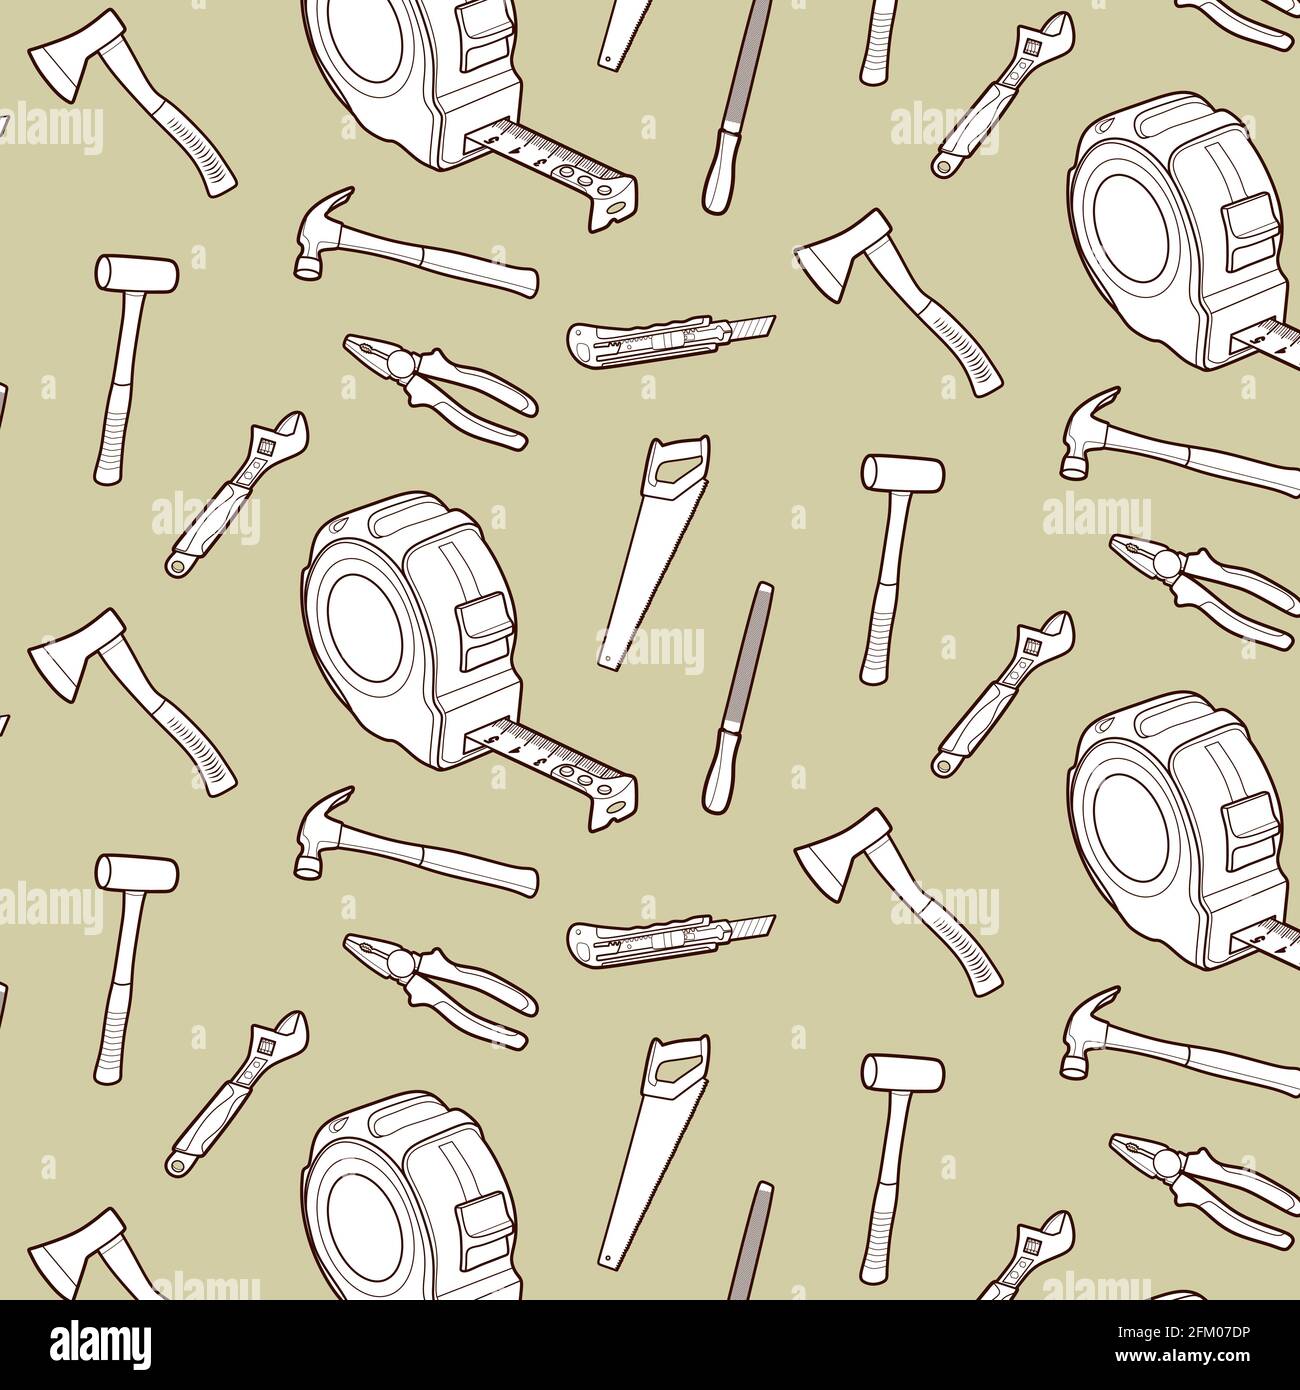 Seamless pattern. Working tools icon set vector illustration line art on beige background Stock Vector